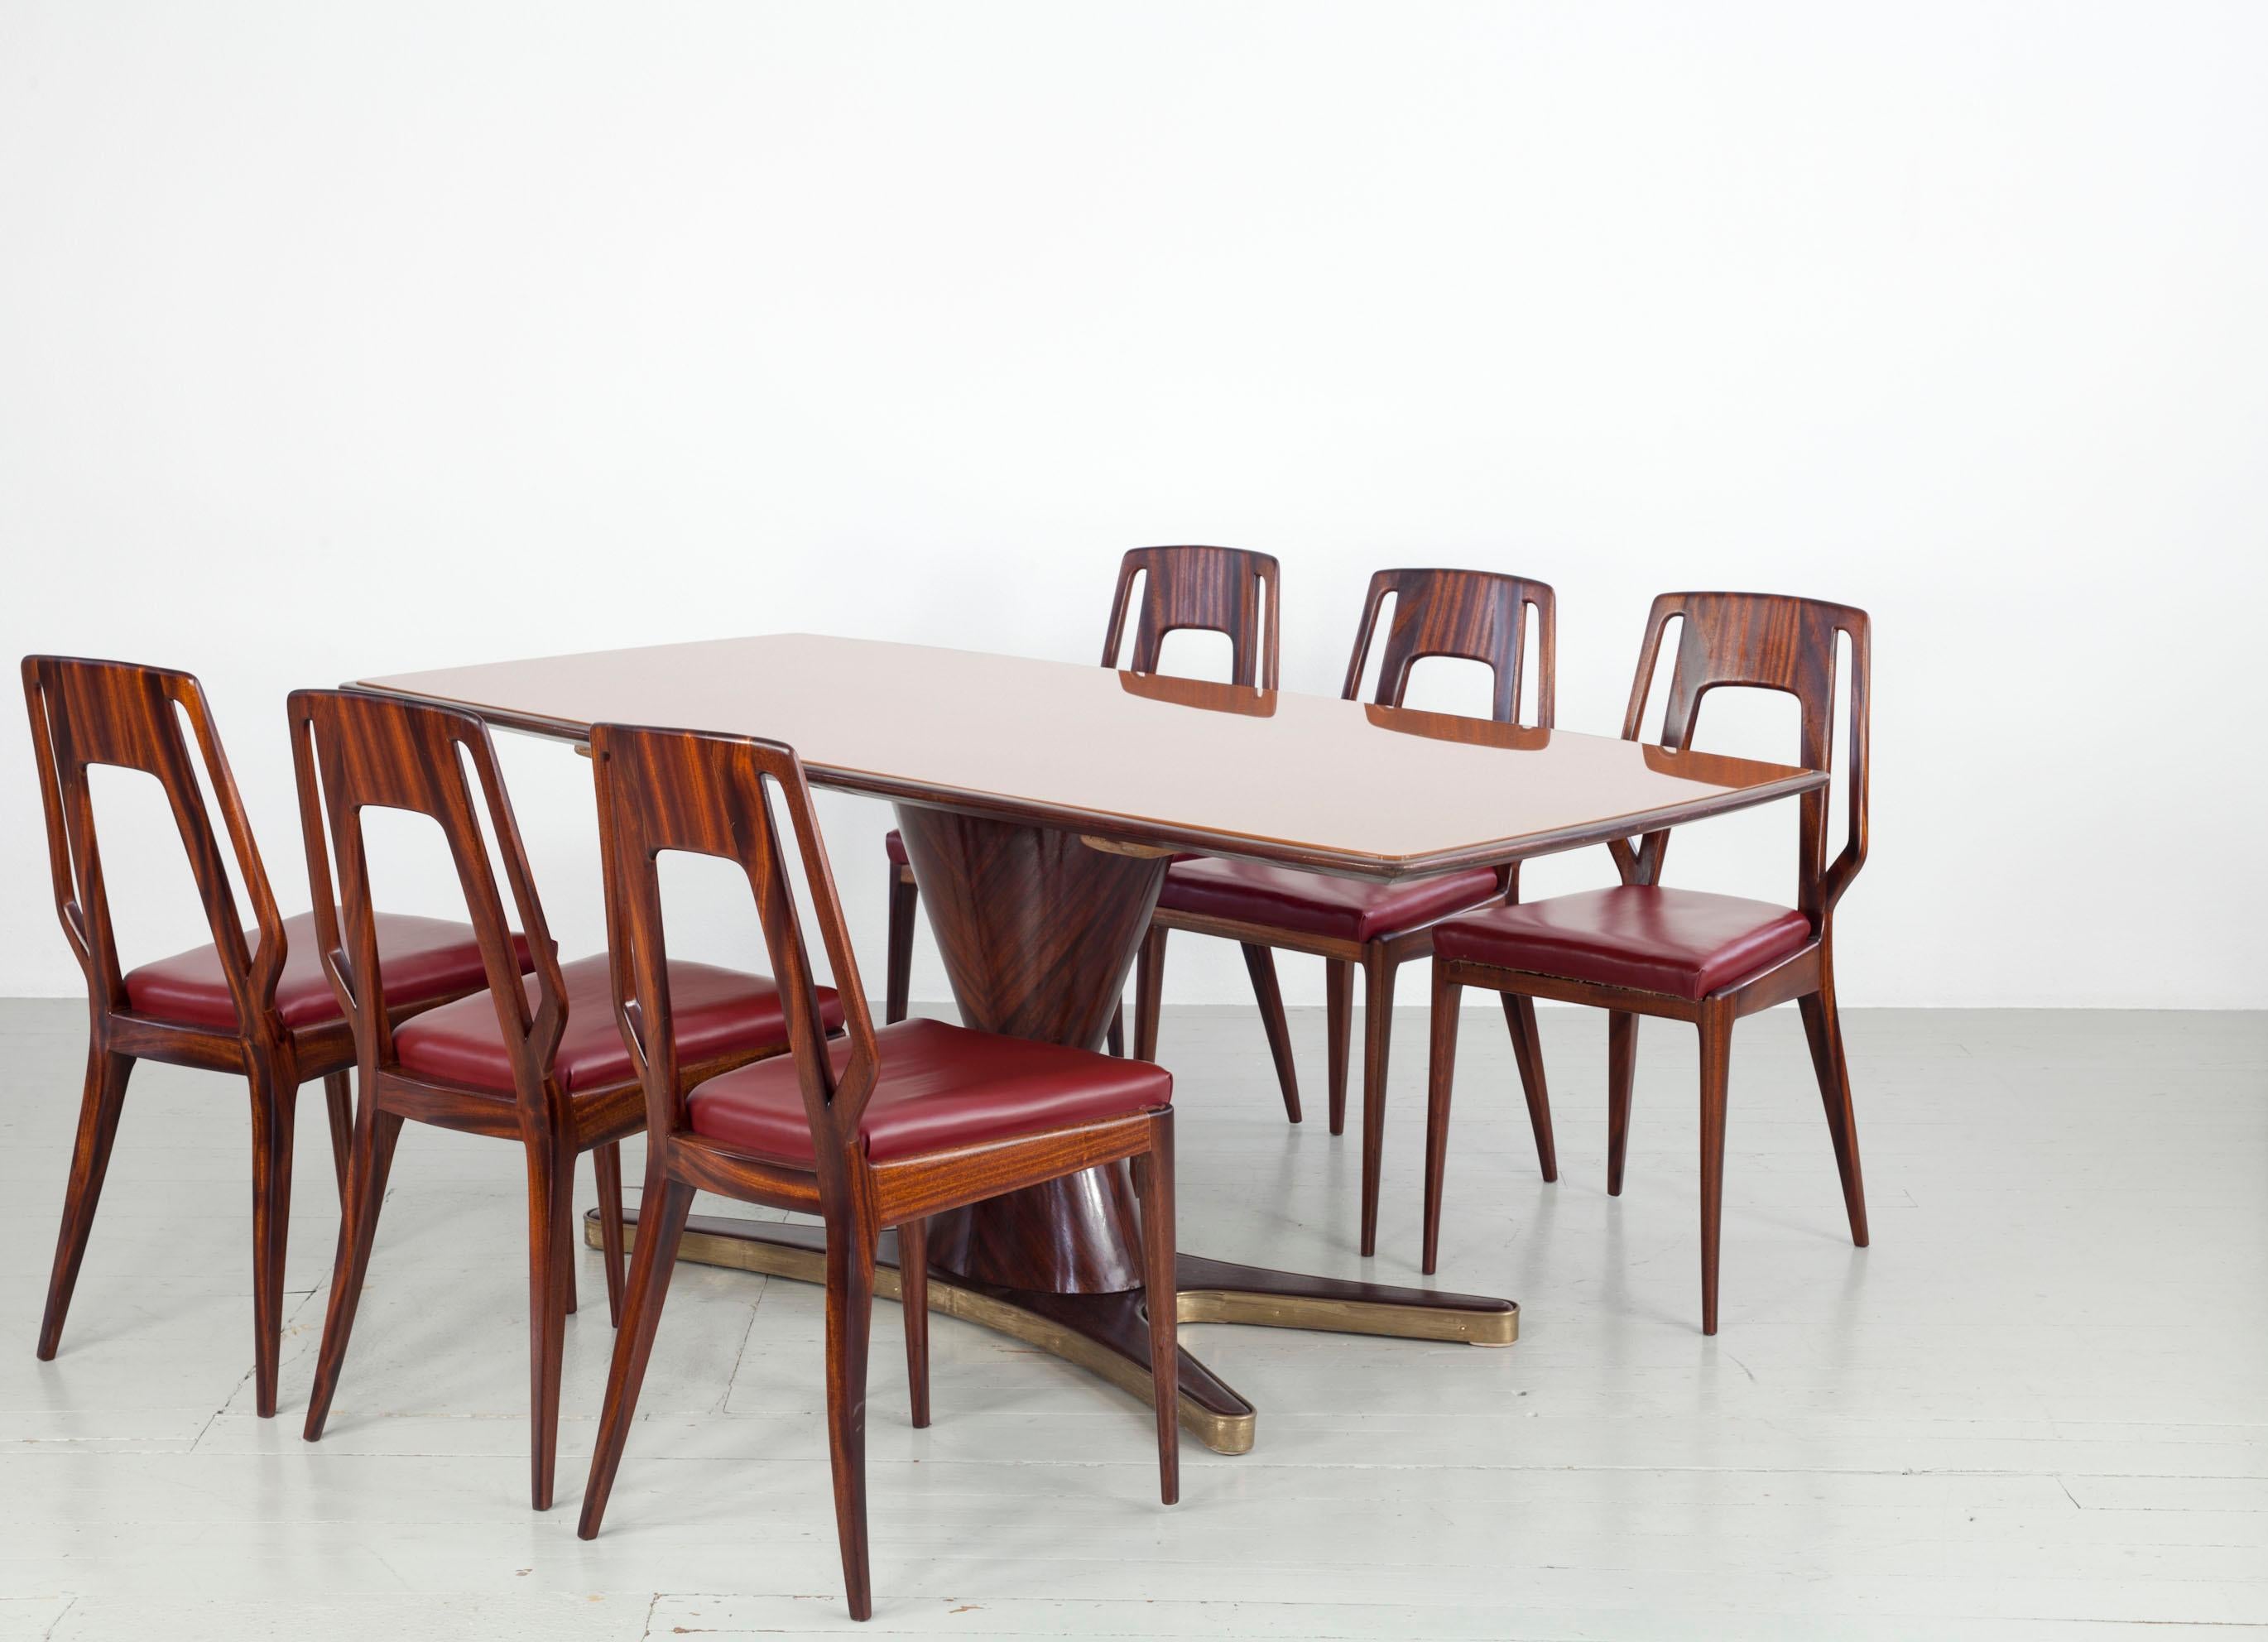 Set of 6 Italian Vittorio Dassi Dining Room Chairs, 1950s For Sale 14